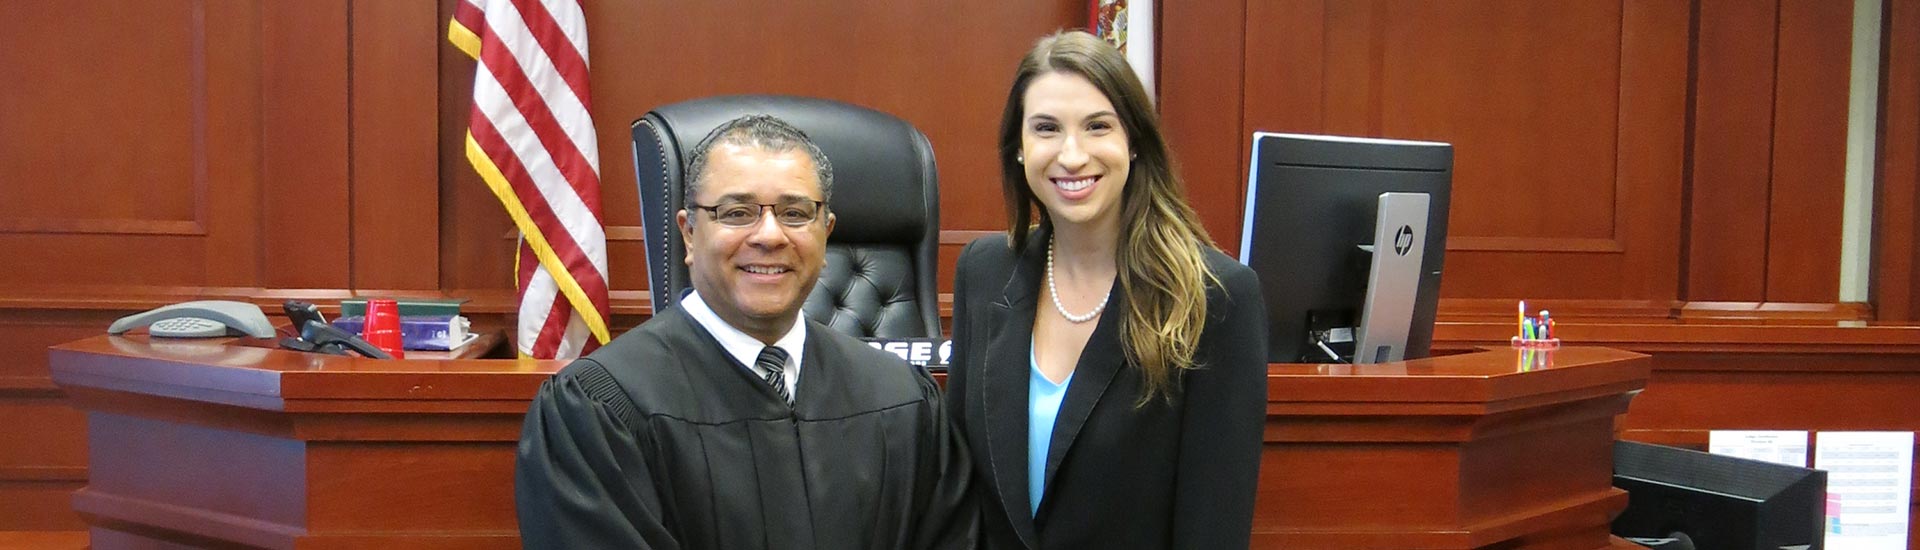 Alyson G. Bryant with Judge in Courtroom